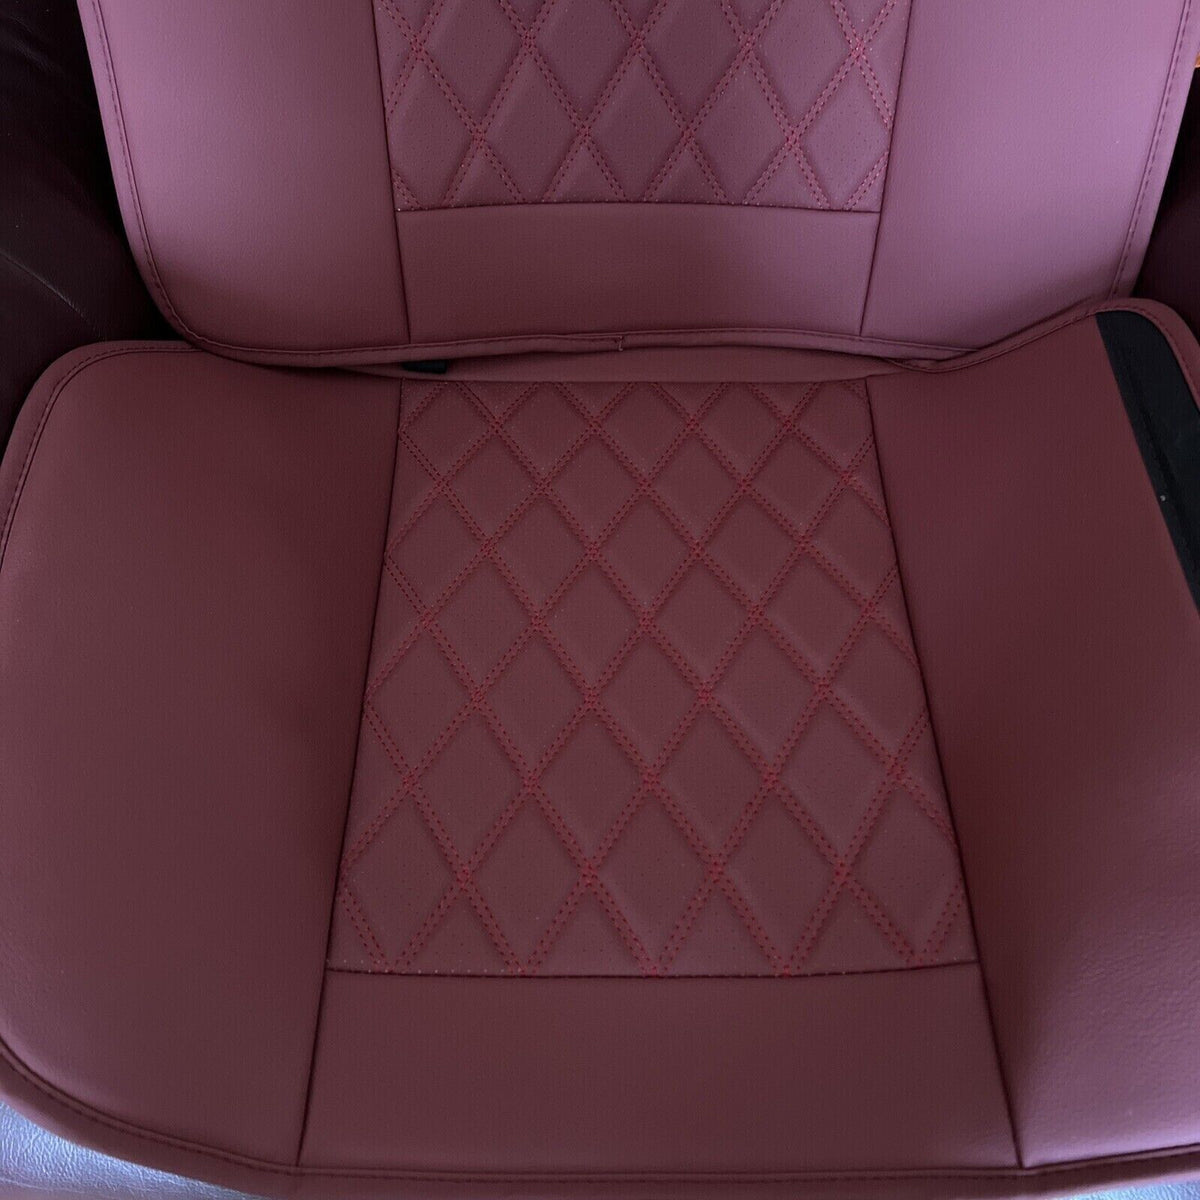 LINGVIDO Burgundy Faux Leather Car Seat Covers